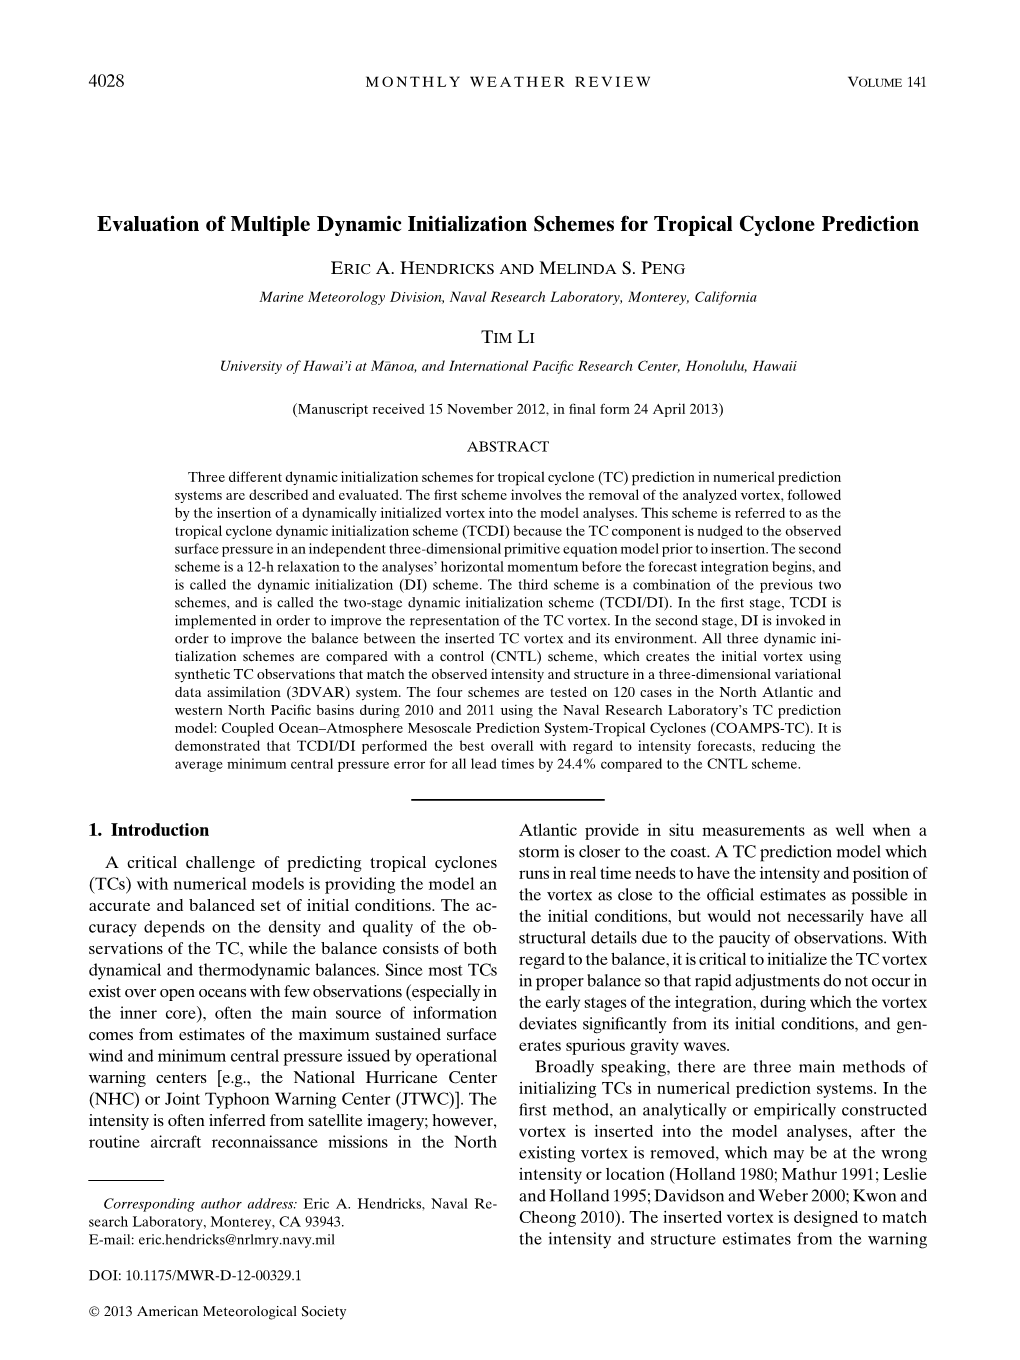 Evaluation of Multiple Dynamic Initialization Schemes for Tropical Cyclone Prediction